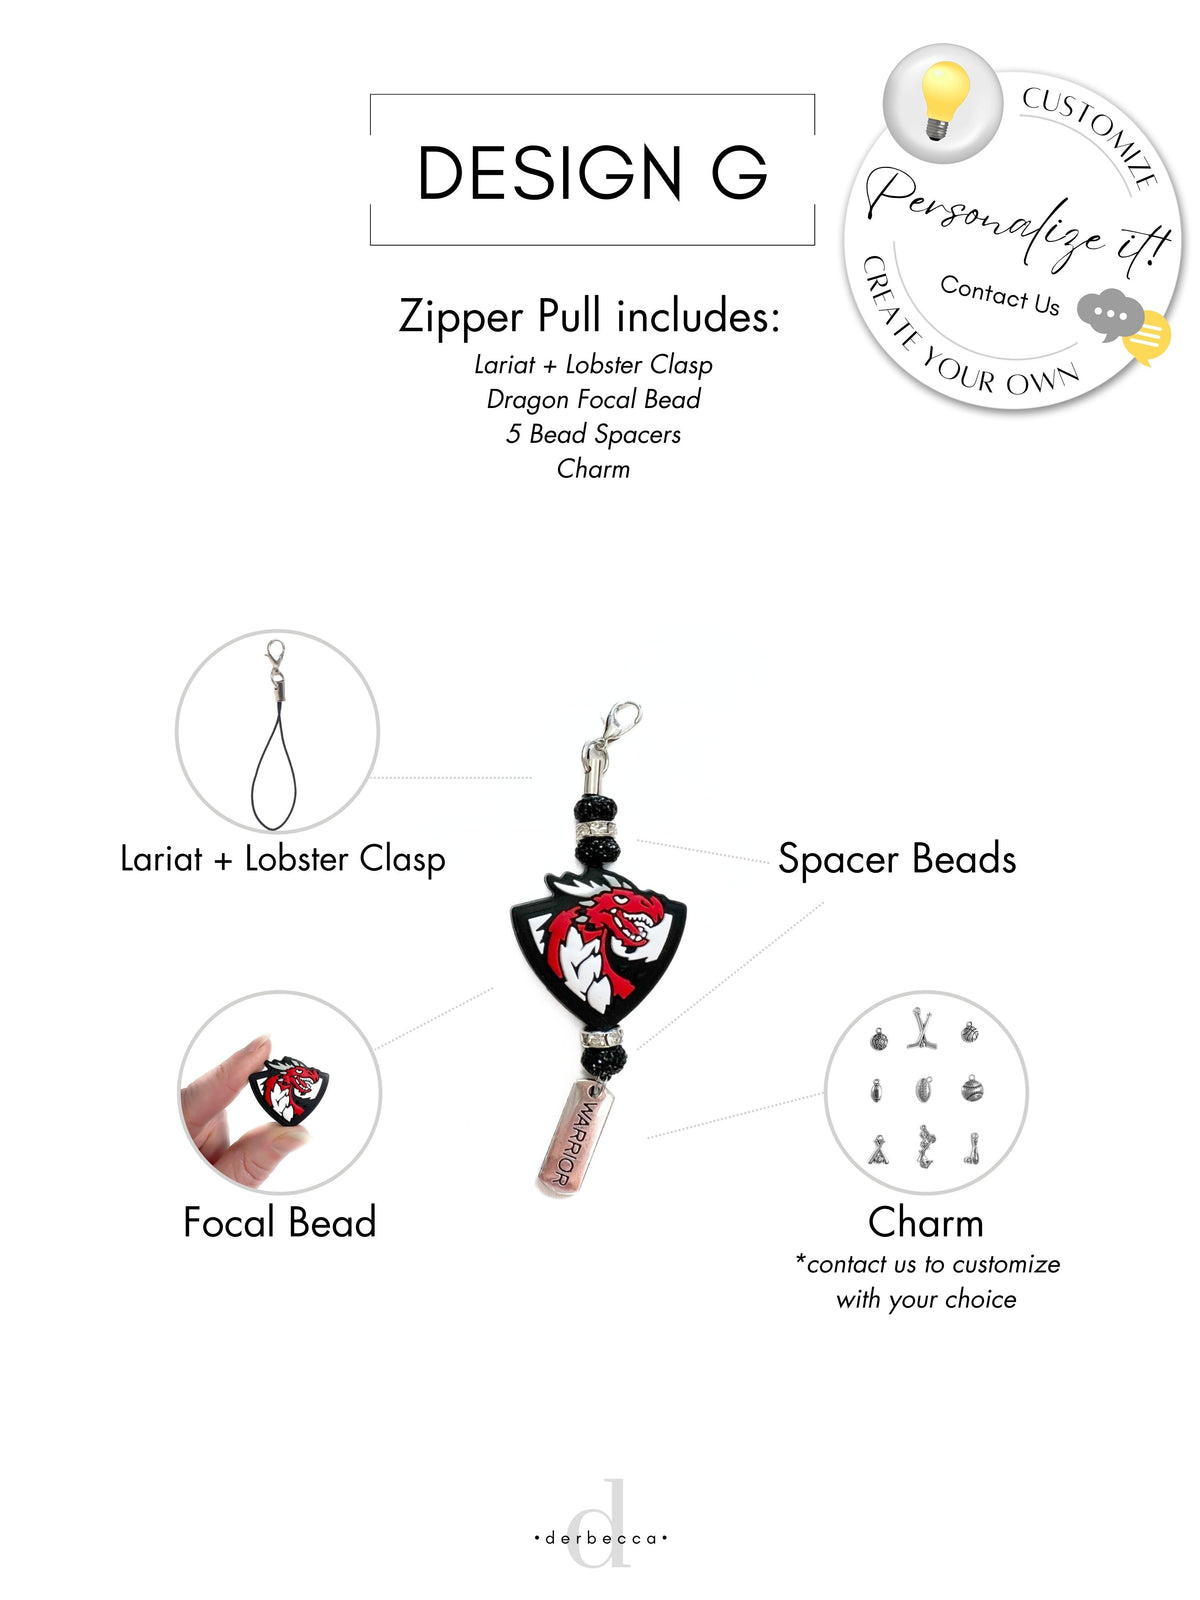 Zipper Pull with Lariat + Lobster Clasp Dragon Focal Bead 5 Bead Spacers Warrior Charm